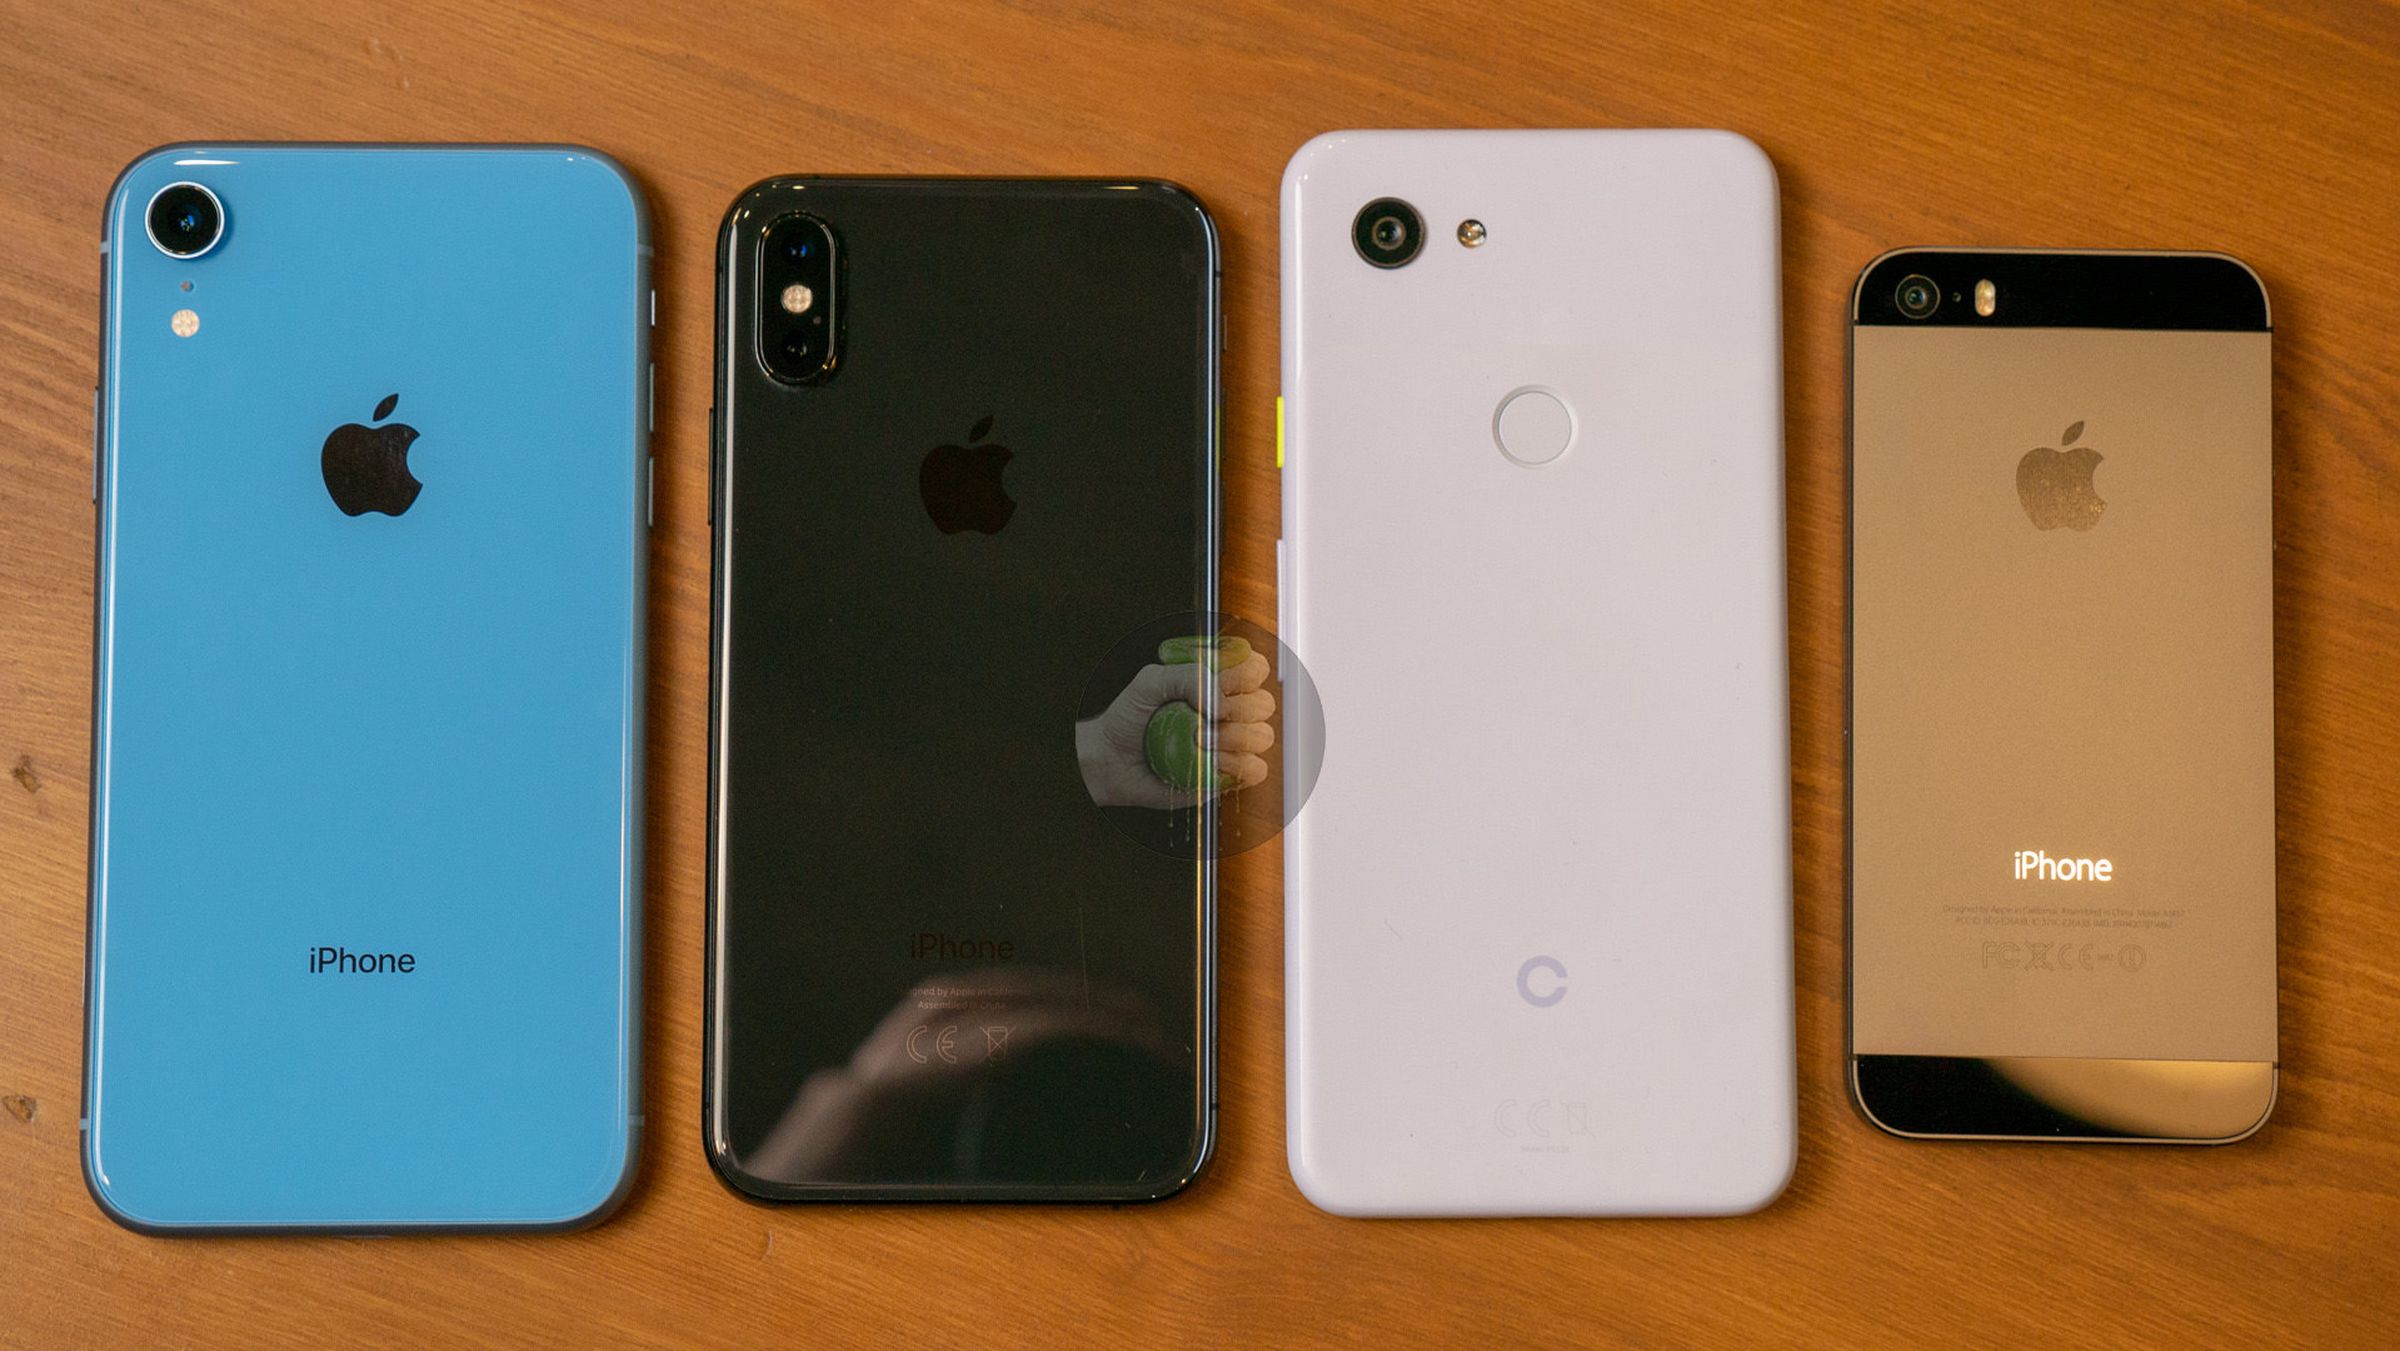 iPhone XR, iPhone XS, Pixel 3 Lite, and iPhone 5S  